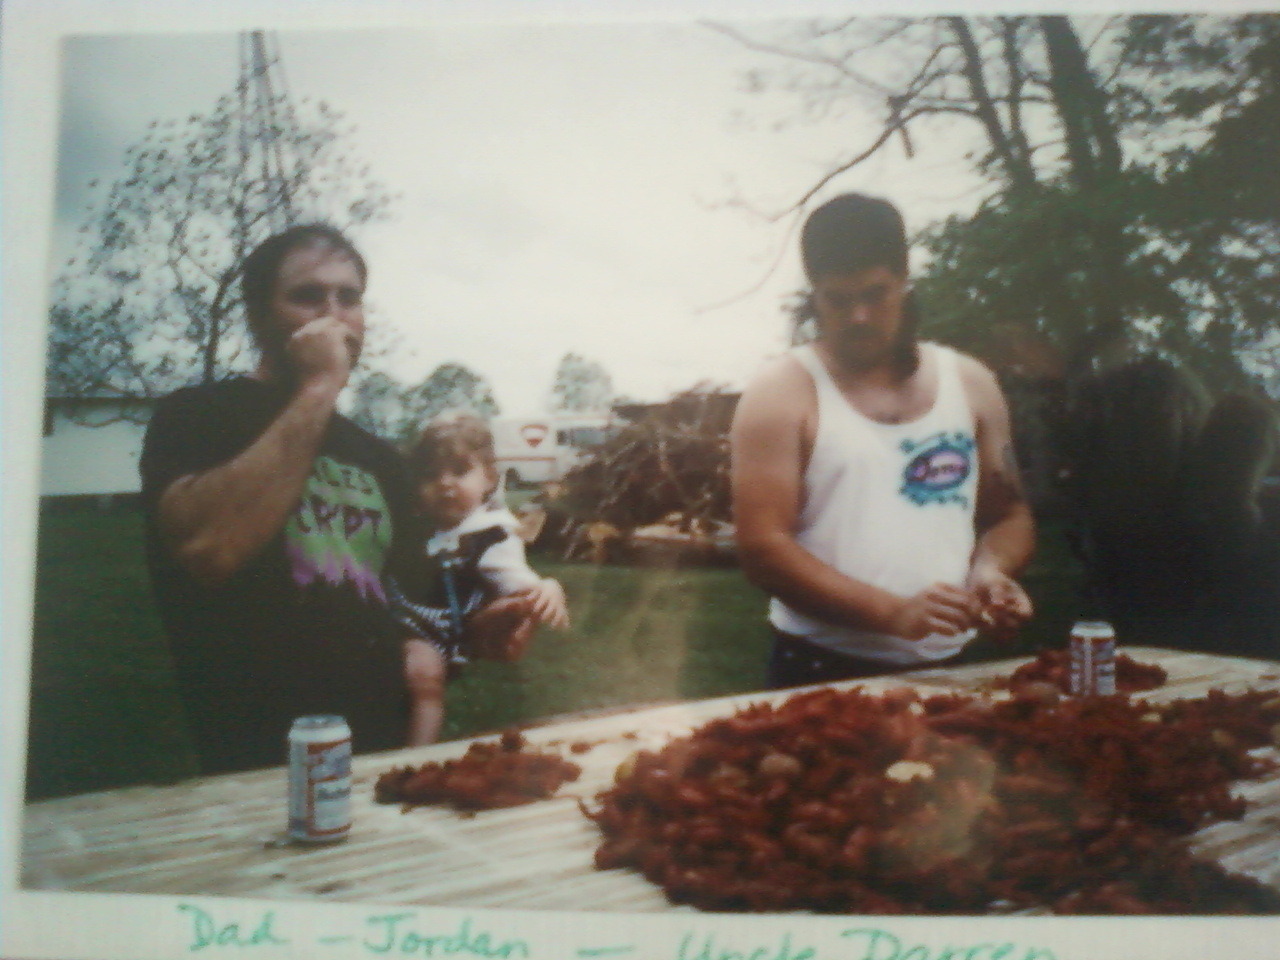 My dad, me, and uncle